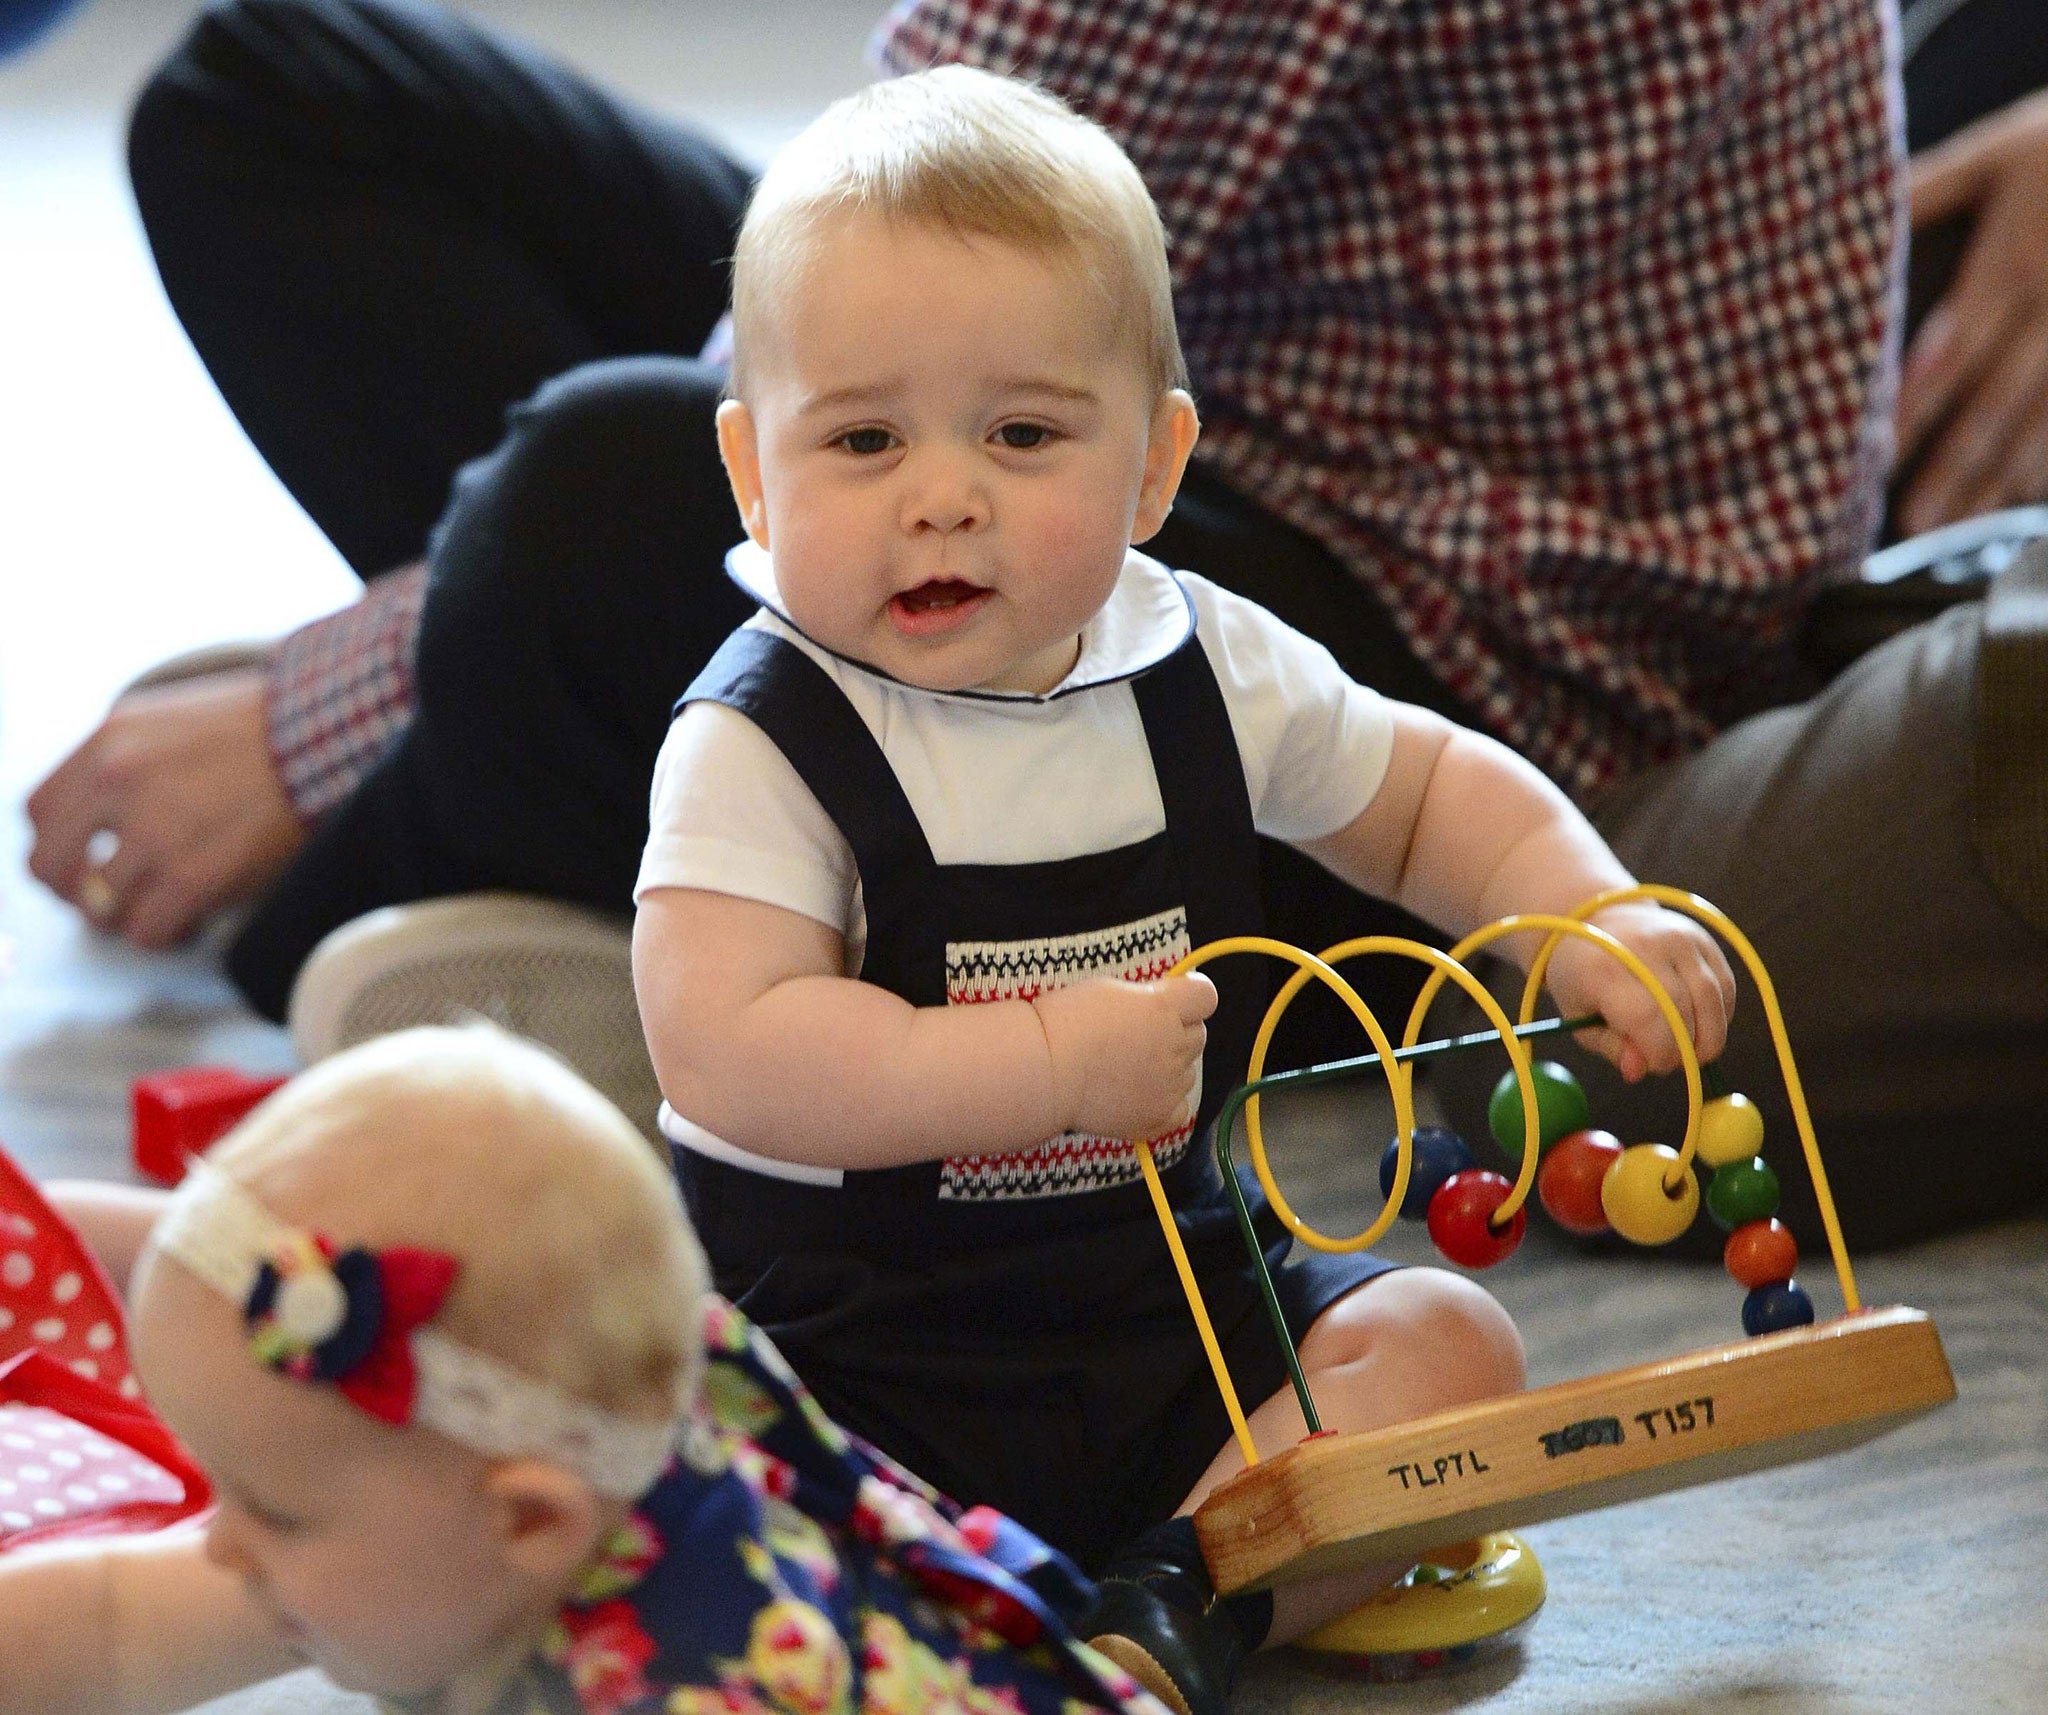 Prince George plays with a toy at a Plunket play group event at the Government House in Wellington